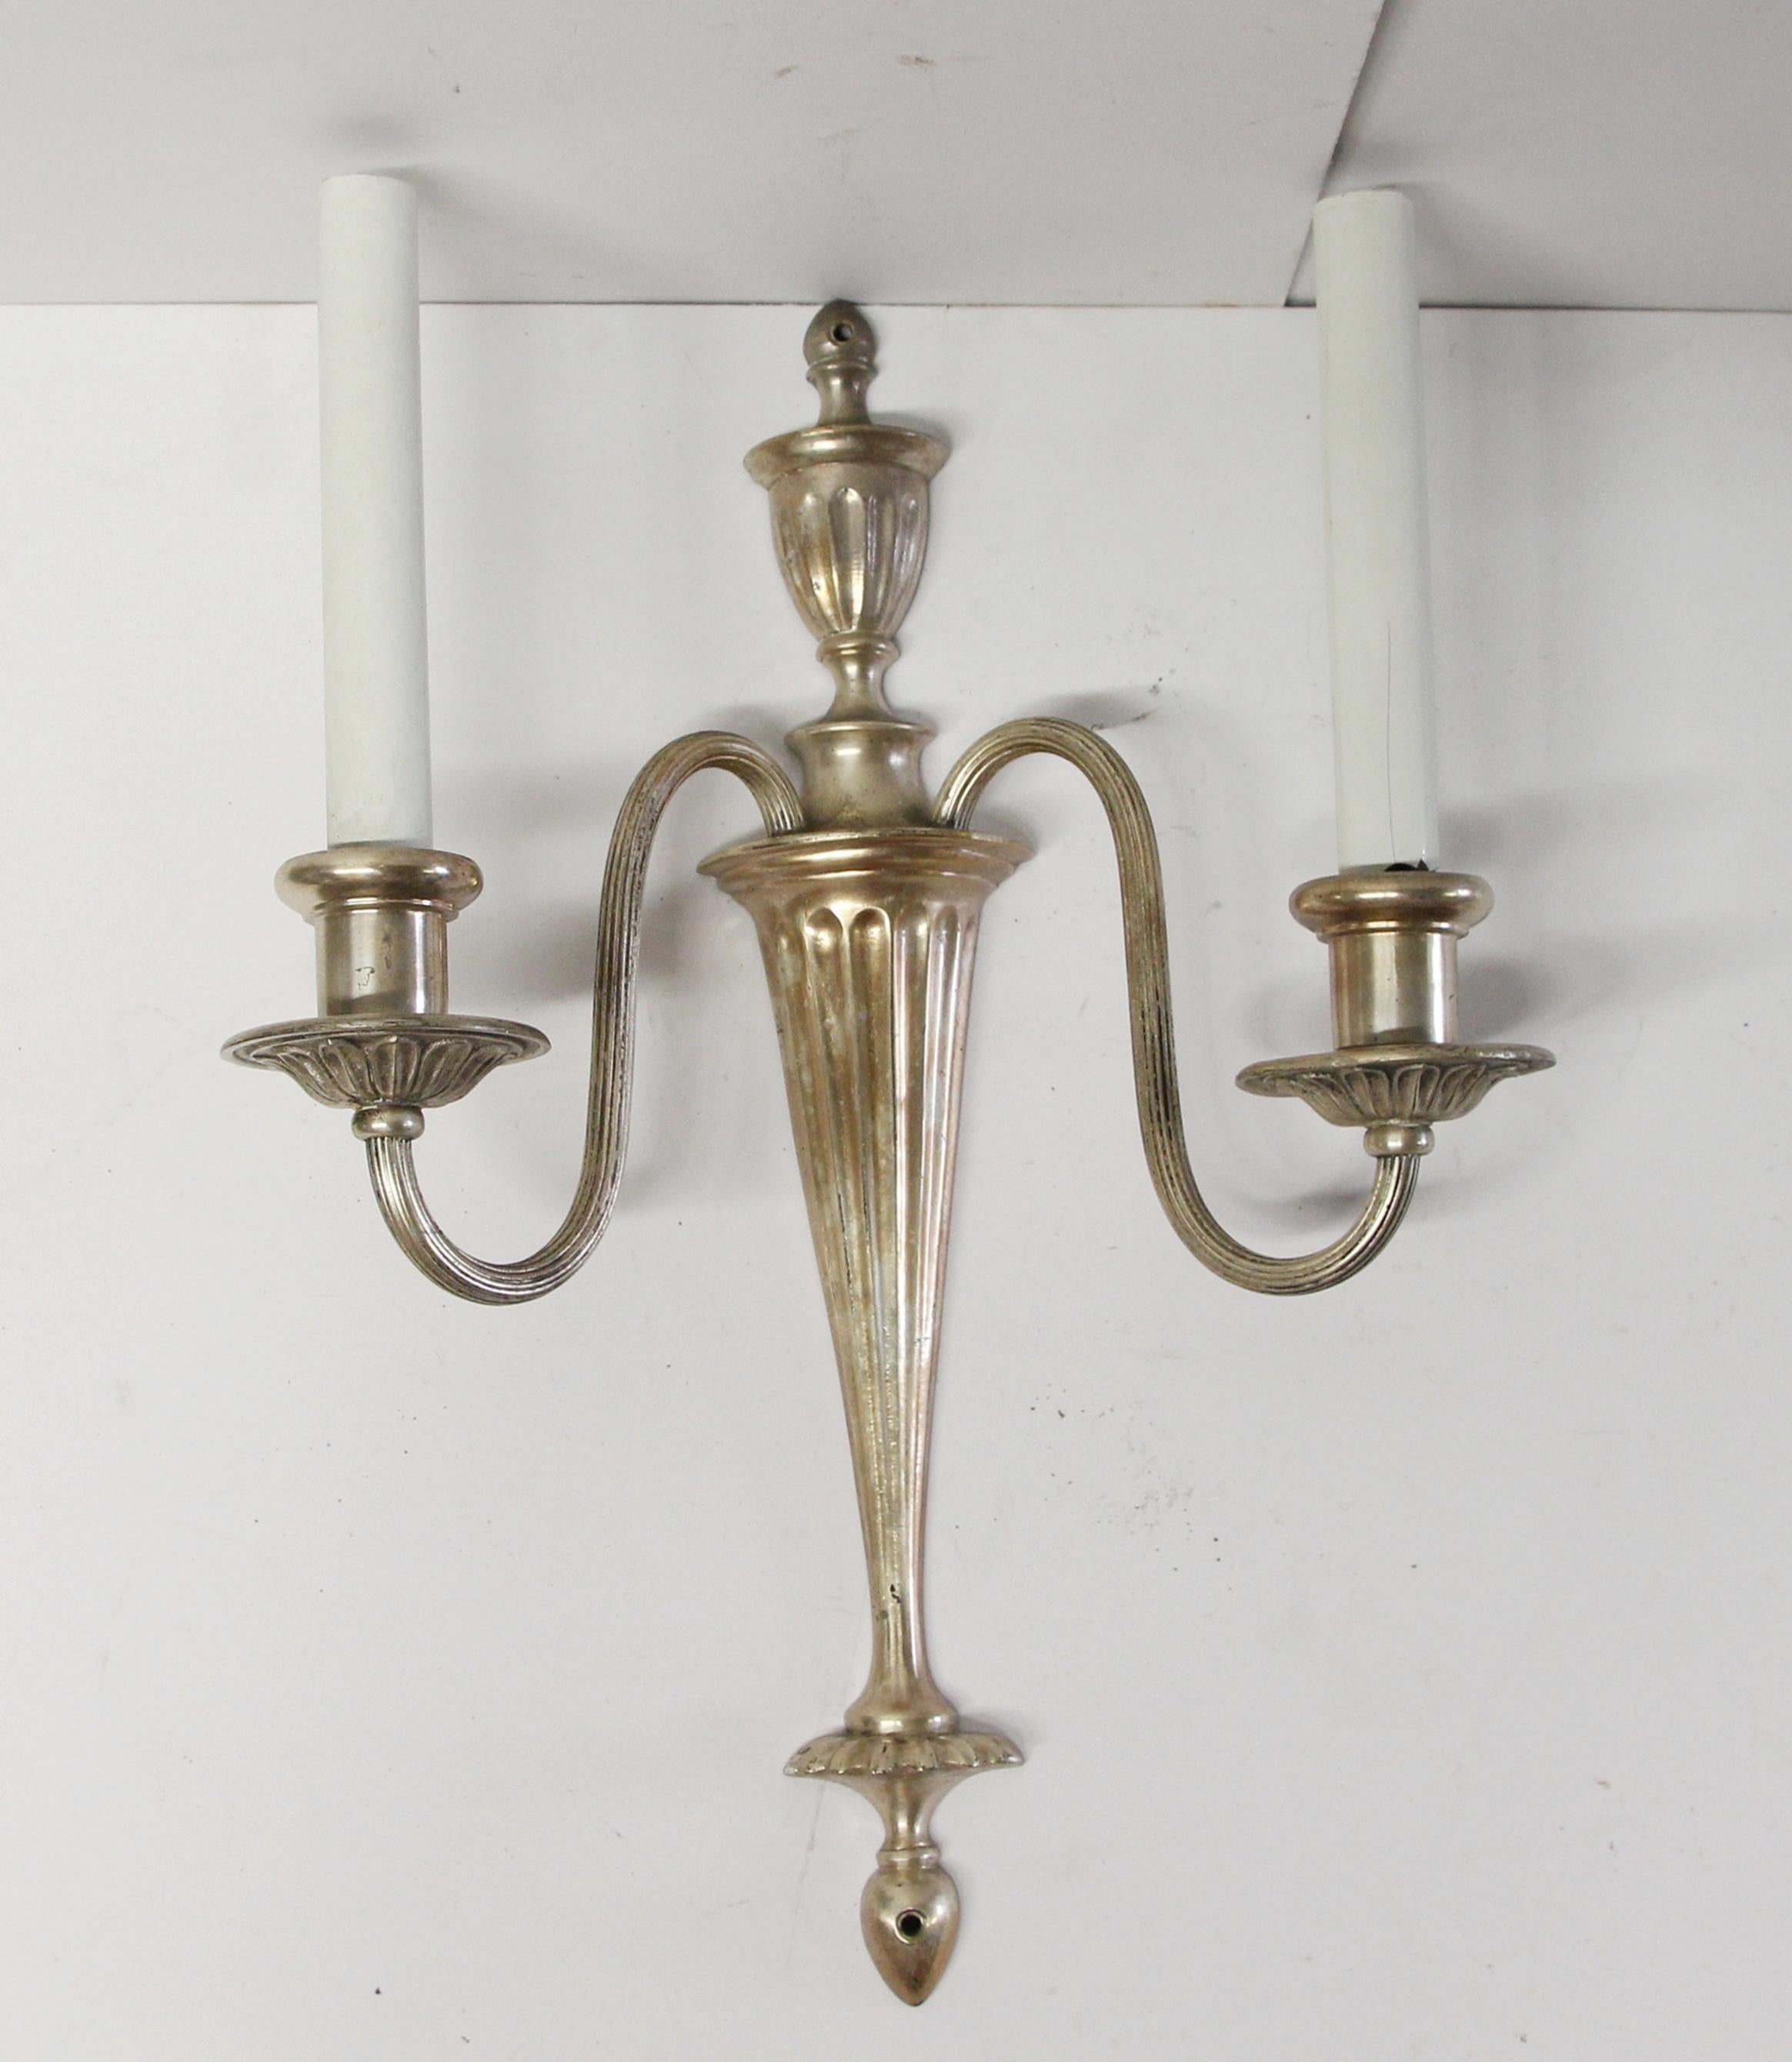 Classic Federal style two arm sconces made of silvered brass. Fluted urn style center with narrow arms and pineapple finials, circa 1920. Priced as a pair. This can be viewed at our Scranton, Pennsylvania location. Please inquire for the exact